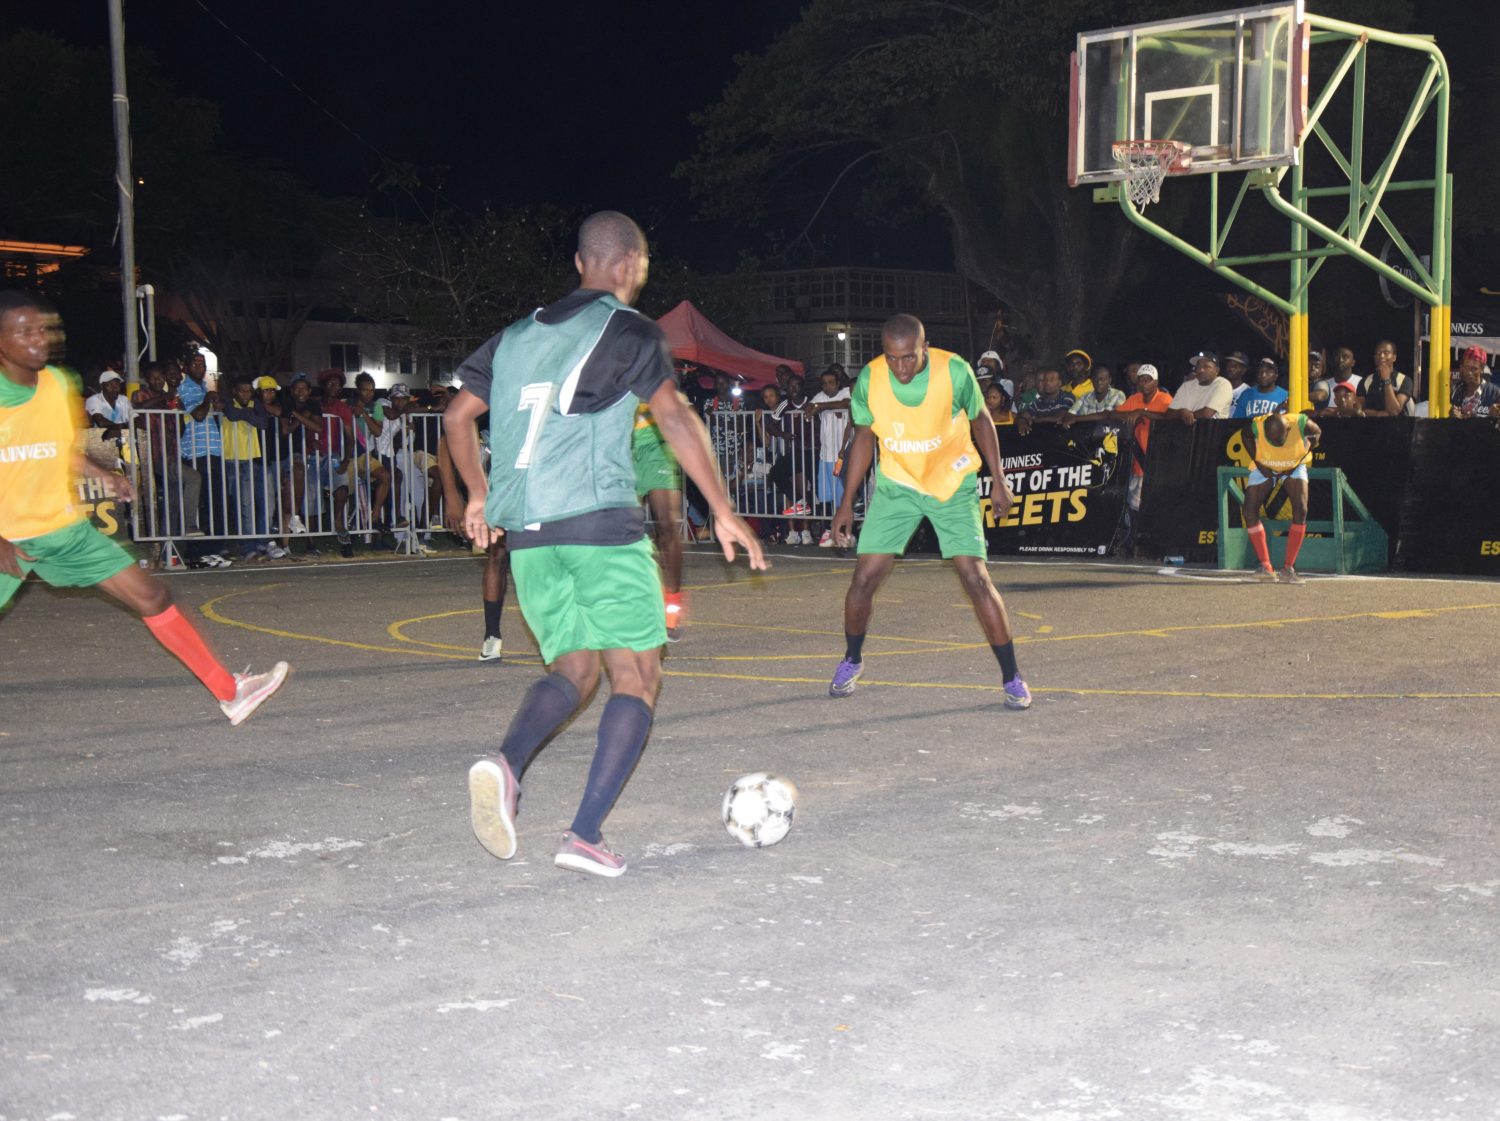 Flashback-Sheldon Profitt (no.7) of Leopold Street initiating an attacking play while being watched closely by Carl Tudor (right) of North East La Penitence in the 7th Guinness ‘Greatest of the Streets’ Georgetown Zone at the Burnham Court.
